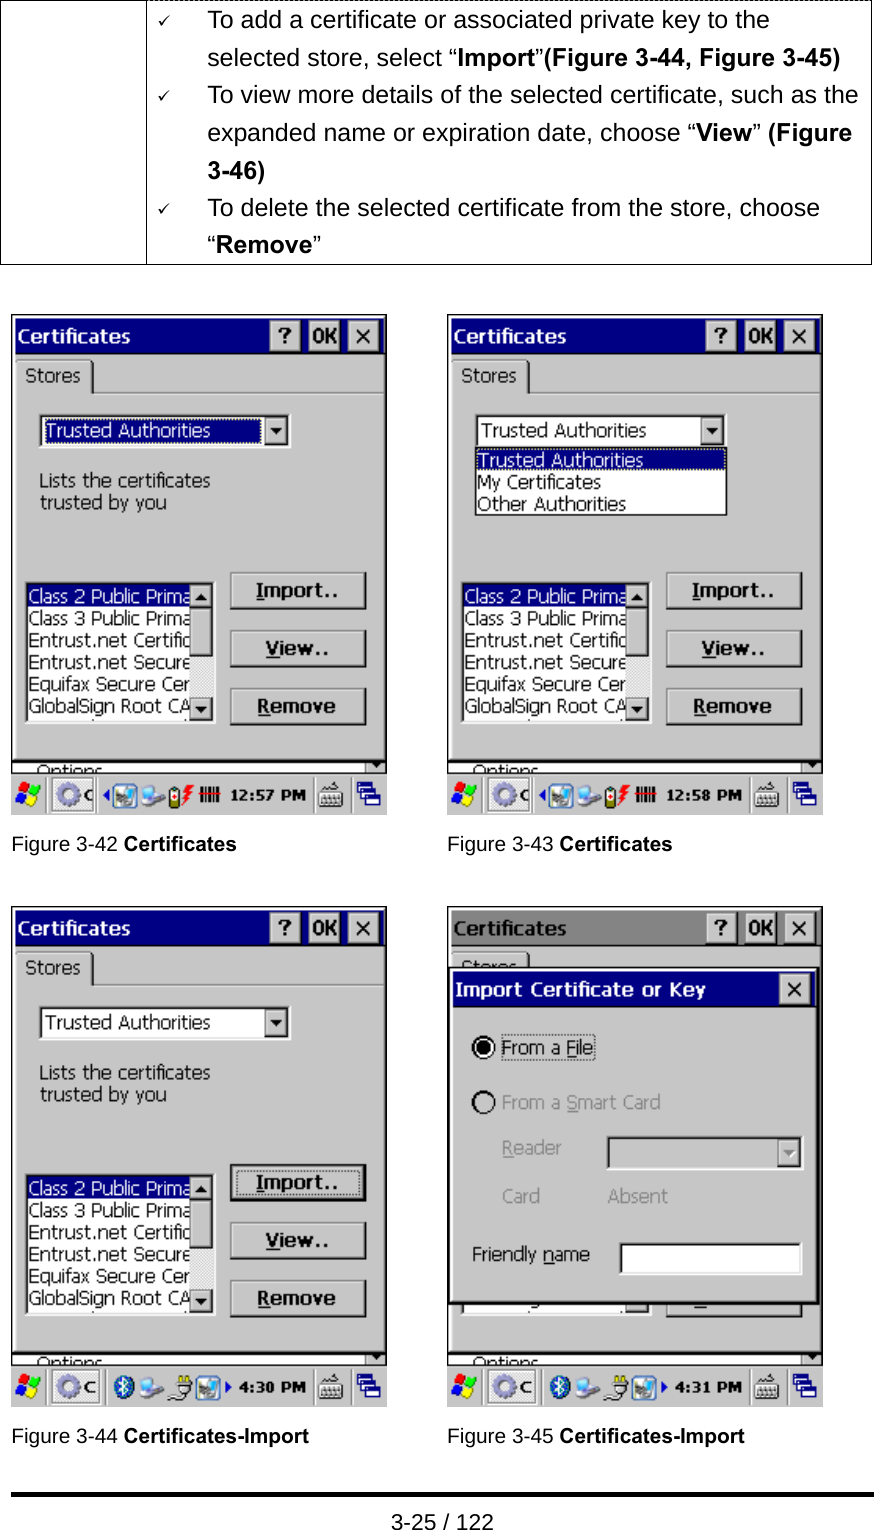  3-25 / 122 9 To add a certificate or associated private key to the selected store, select “Import”(Figure 3-44, Figure 3-45) 9 To view more details of the selected certificate, such as the expanded name or expiration date, choose “View” (Figure 3-46) 9 To delete the selected certificate from the store, choose “Remove”     Figure 3-42 Certificates  Figure 3-43 Certificates     Figure 3-44 Certificates-Import  Figure 3-45 Certificates-Import 